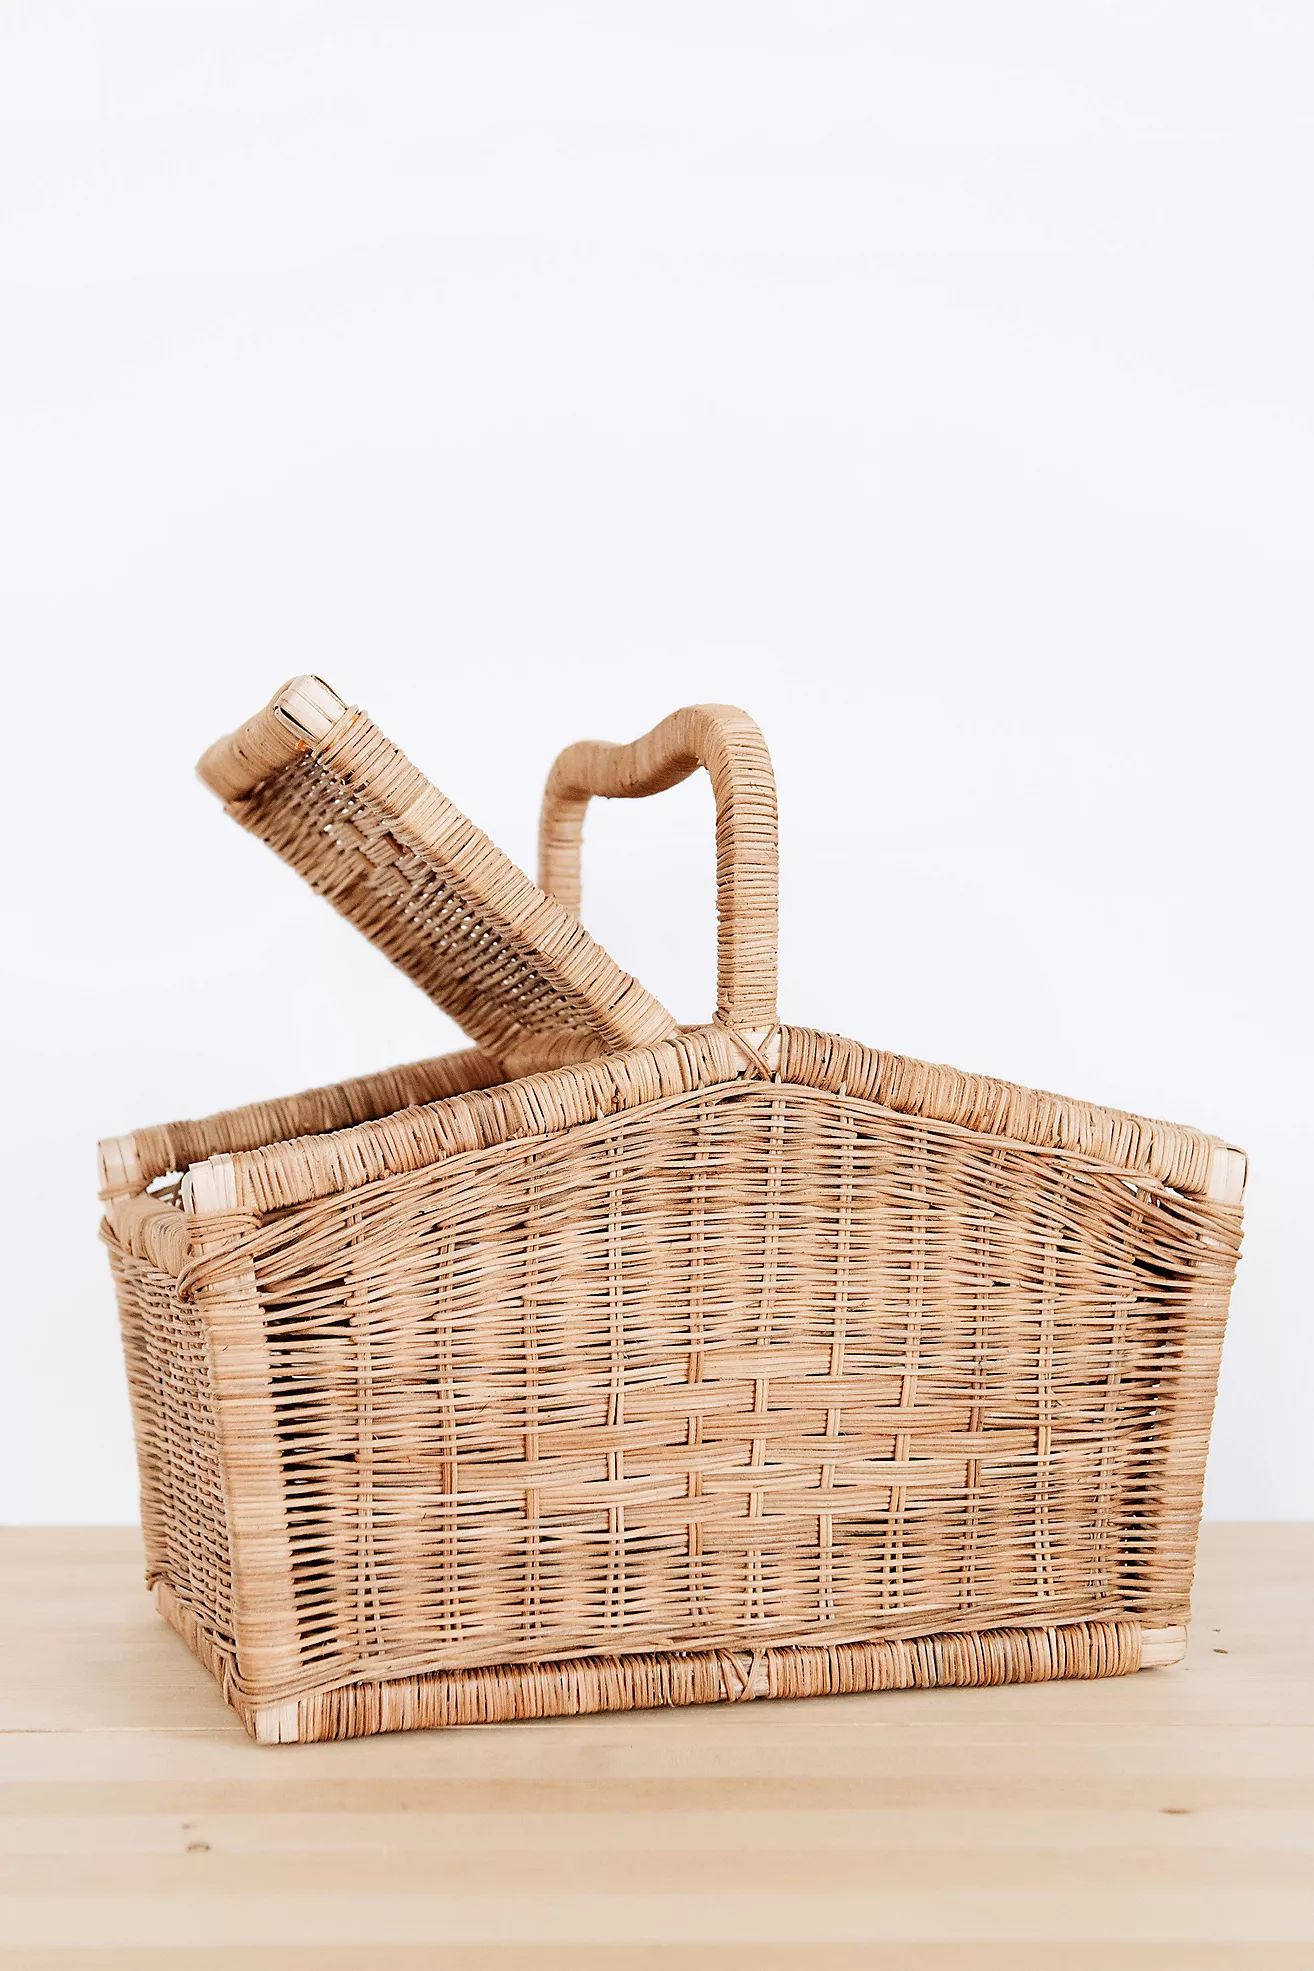 Connected Goods Rattan Picnic Basket | Anthropologie (US)